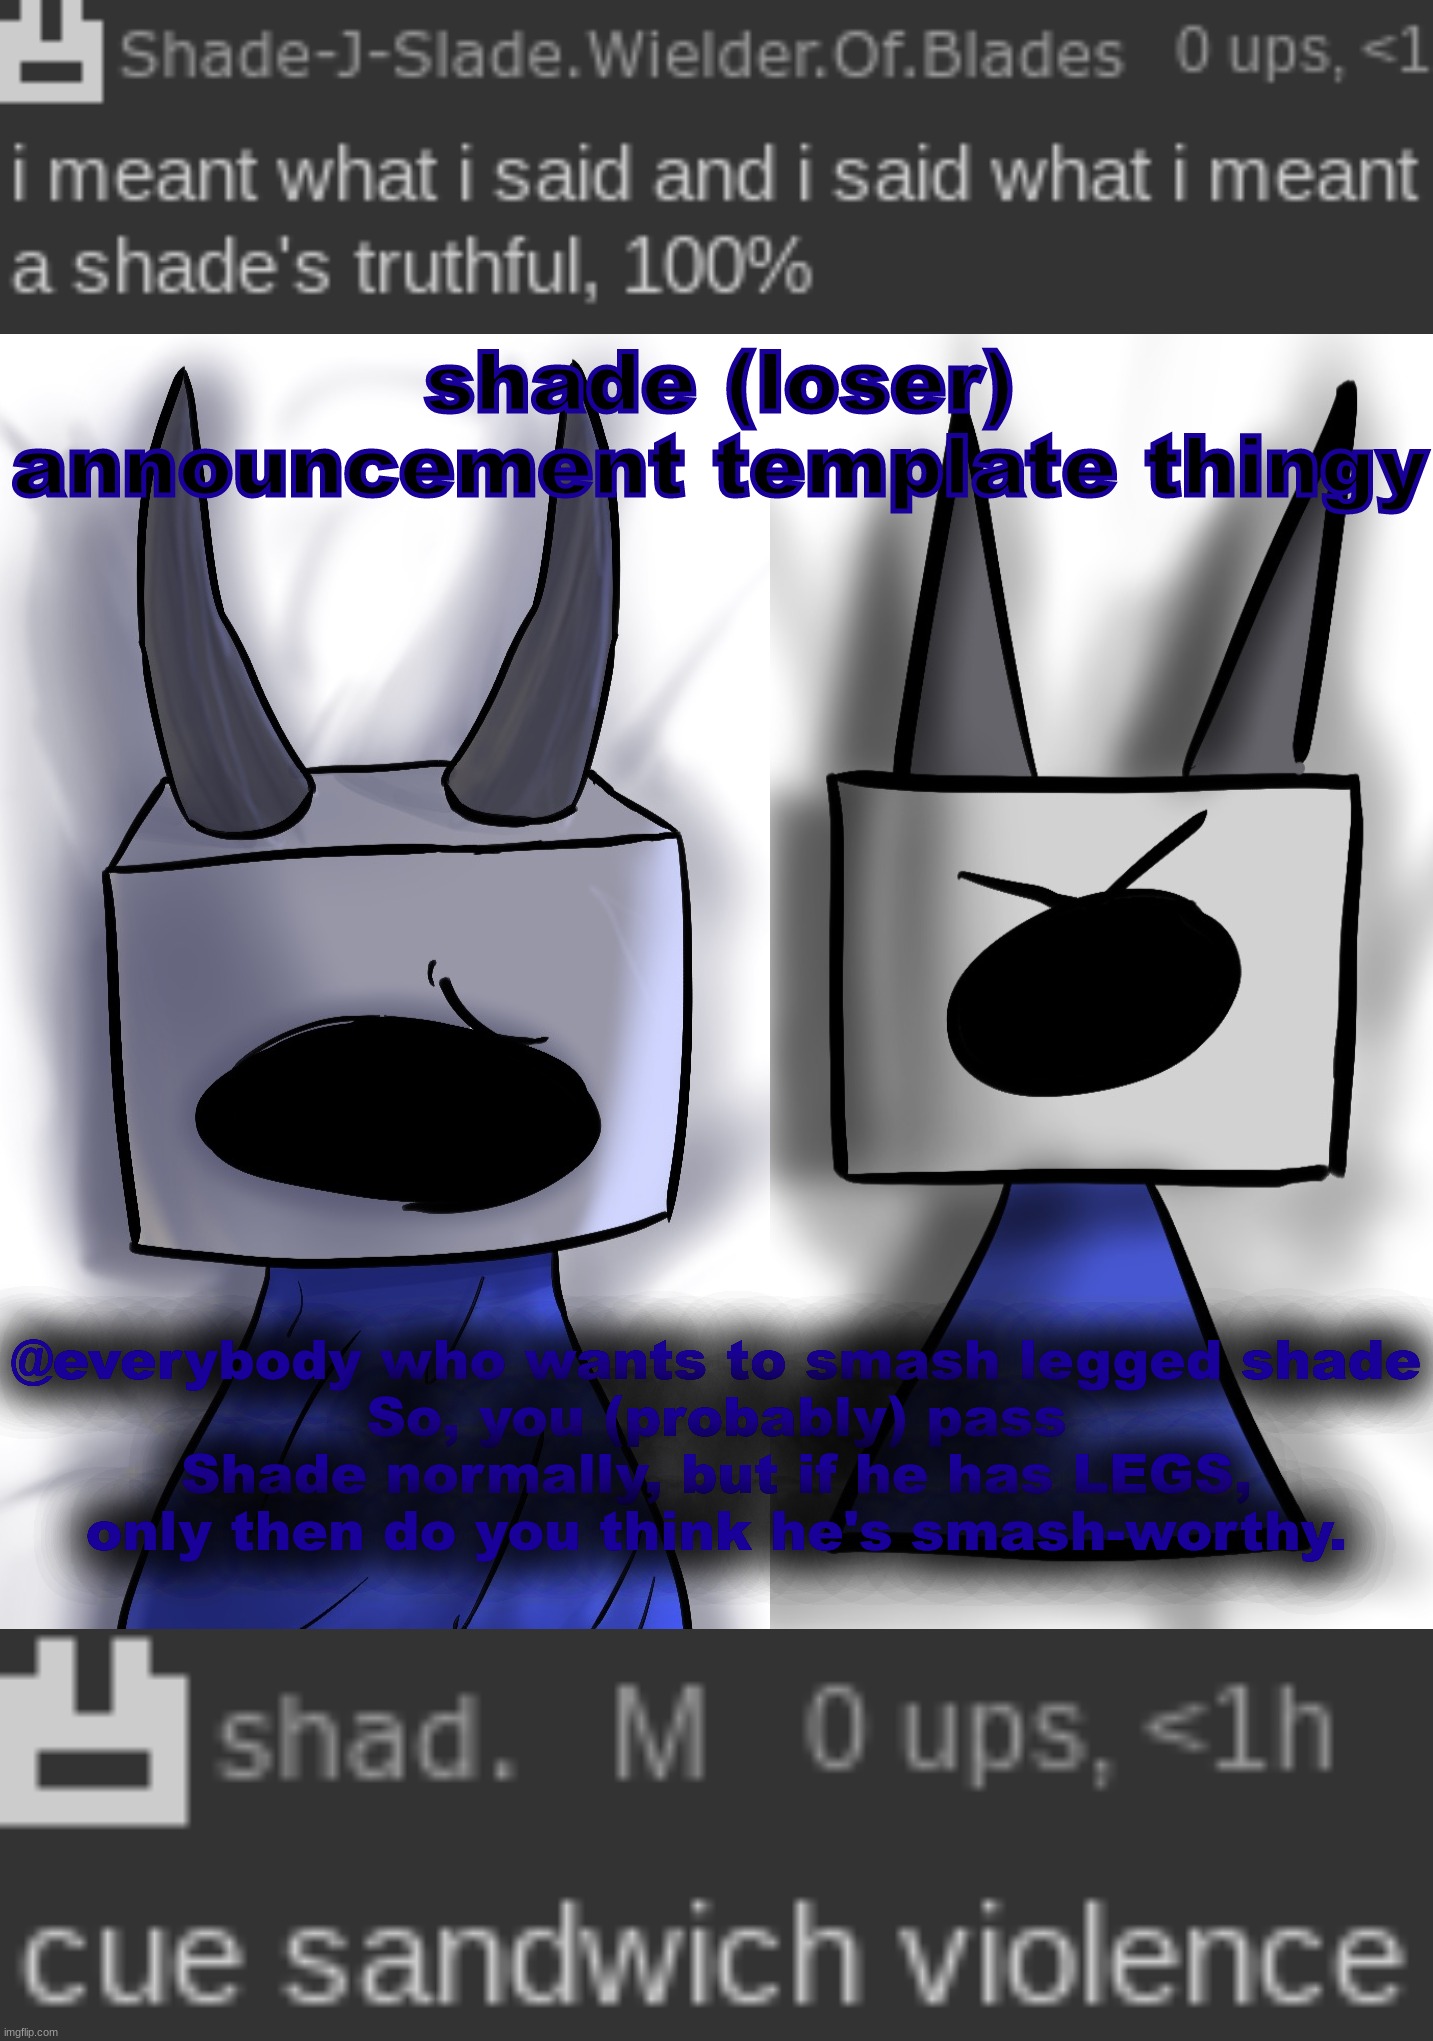 sharted | @everybody who wants to smash legged shade
So, you (probably) pass Shade normally, but if he has LEGS, only then do you think he's smash-worthy. | image tagged in sharted | made w/ Imgflip meme maker